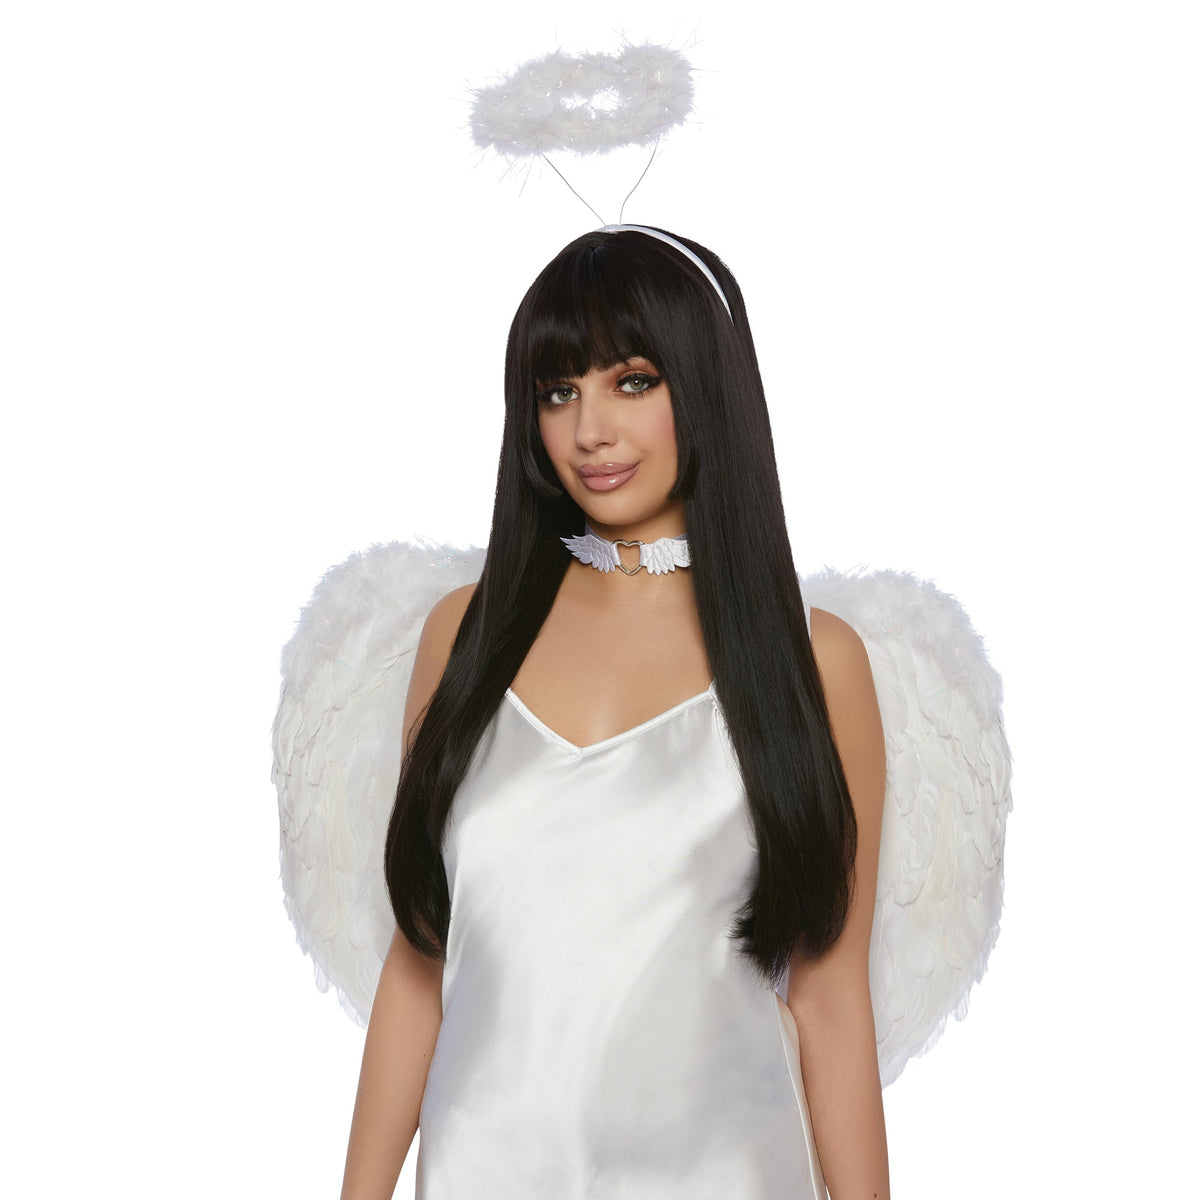 Hangzhou Youzhou import & Export Co. Costumes Accessories White Feather Kit for Adults, Wings and Halo